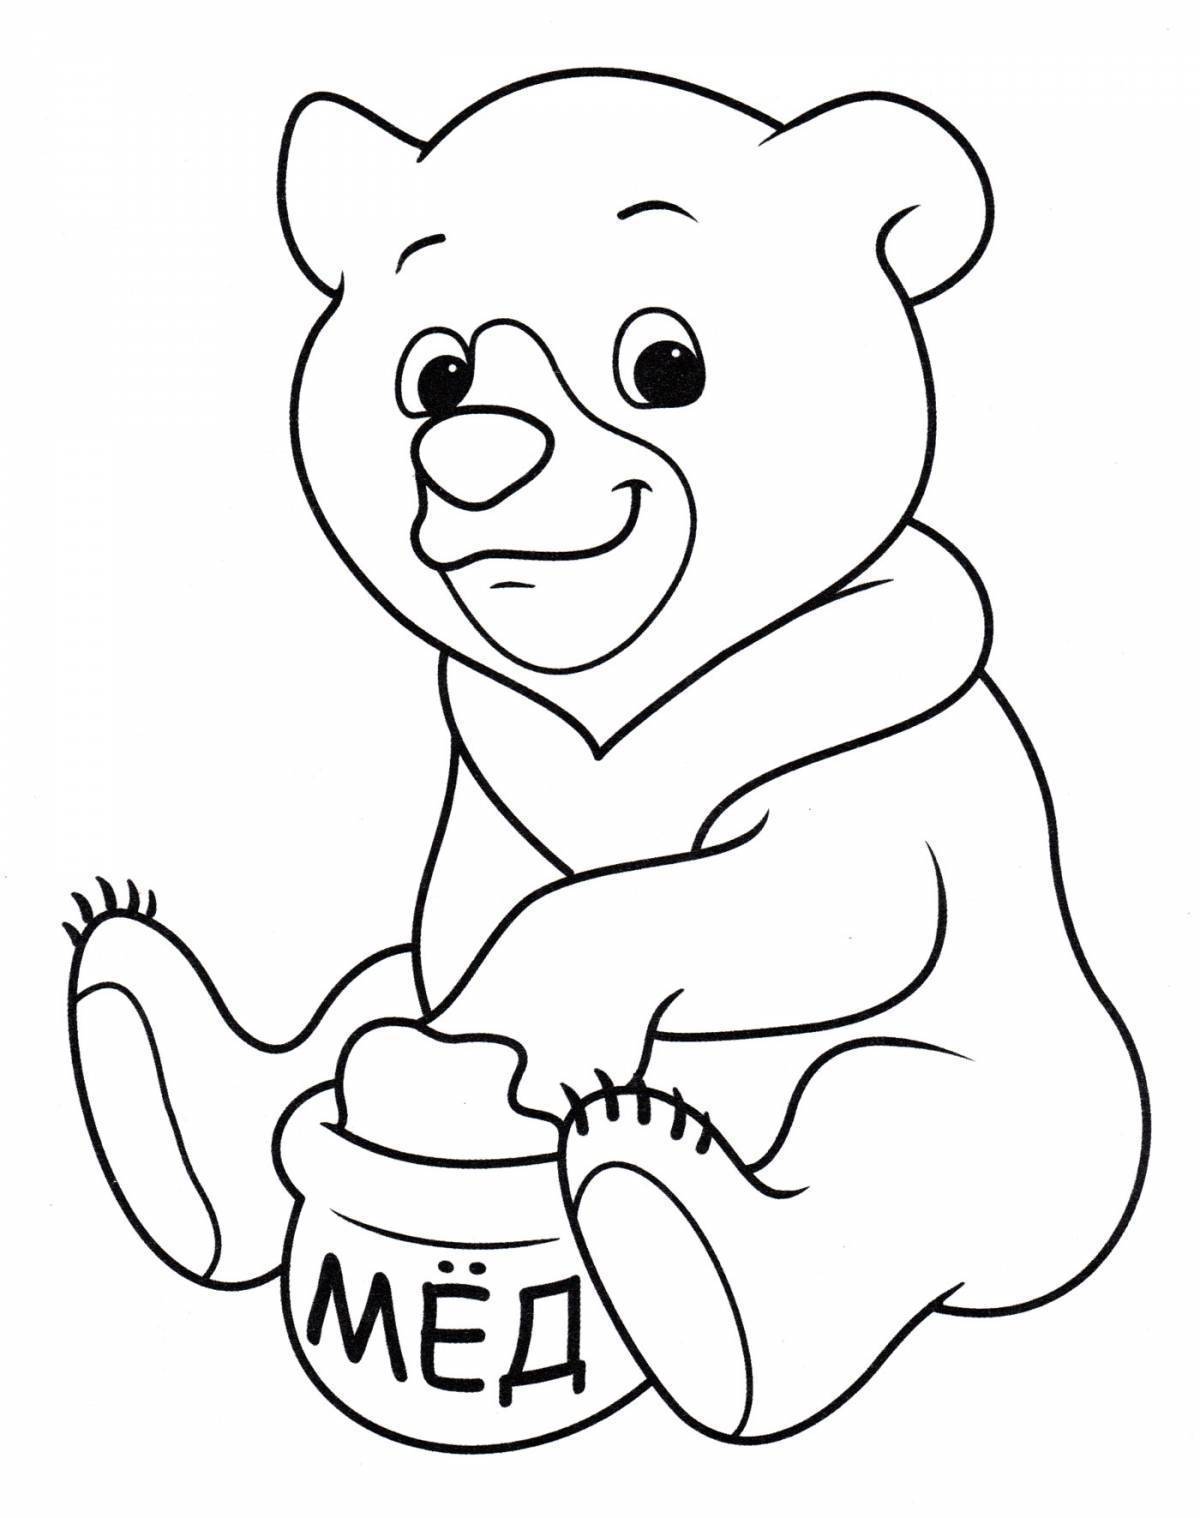 Wrigley teddy bear coloring page